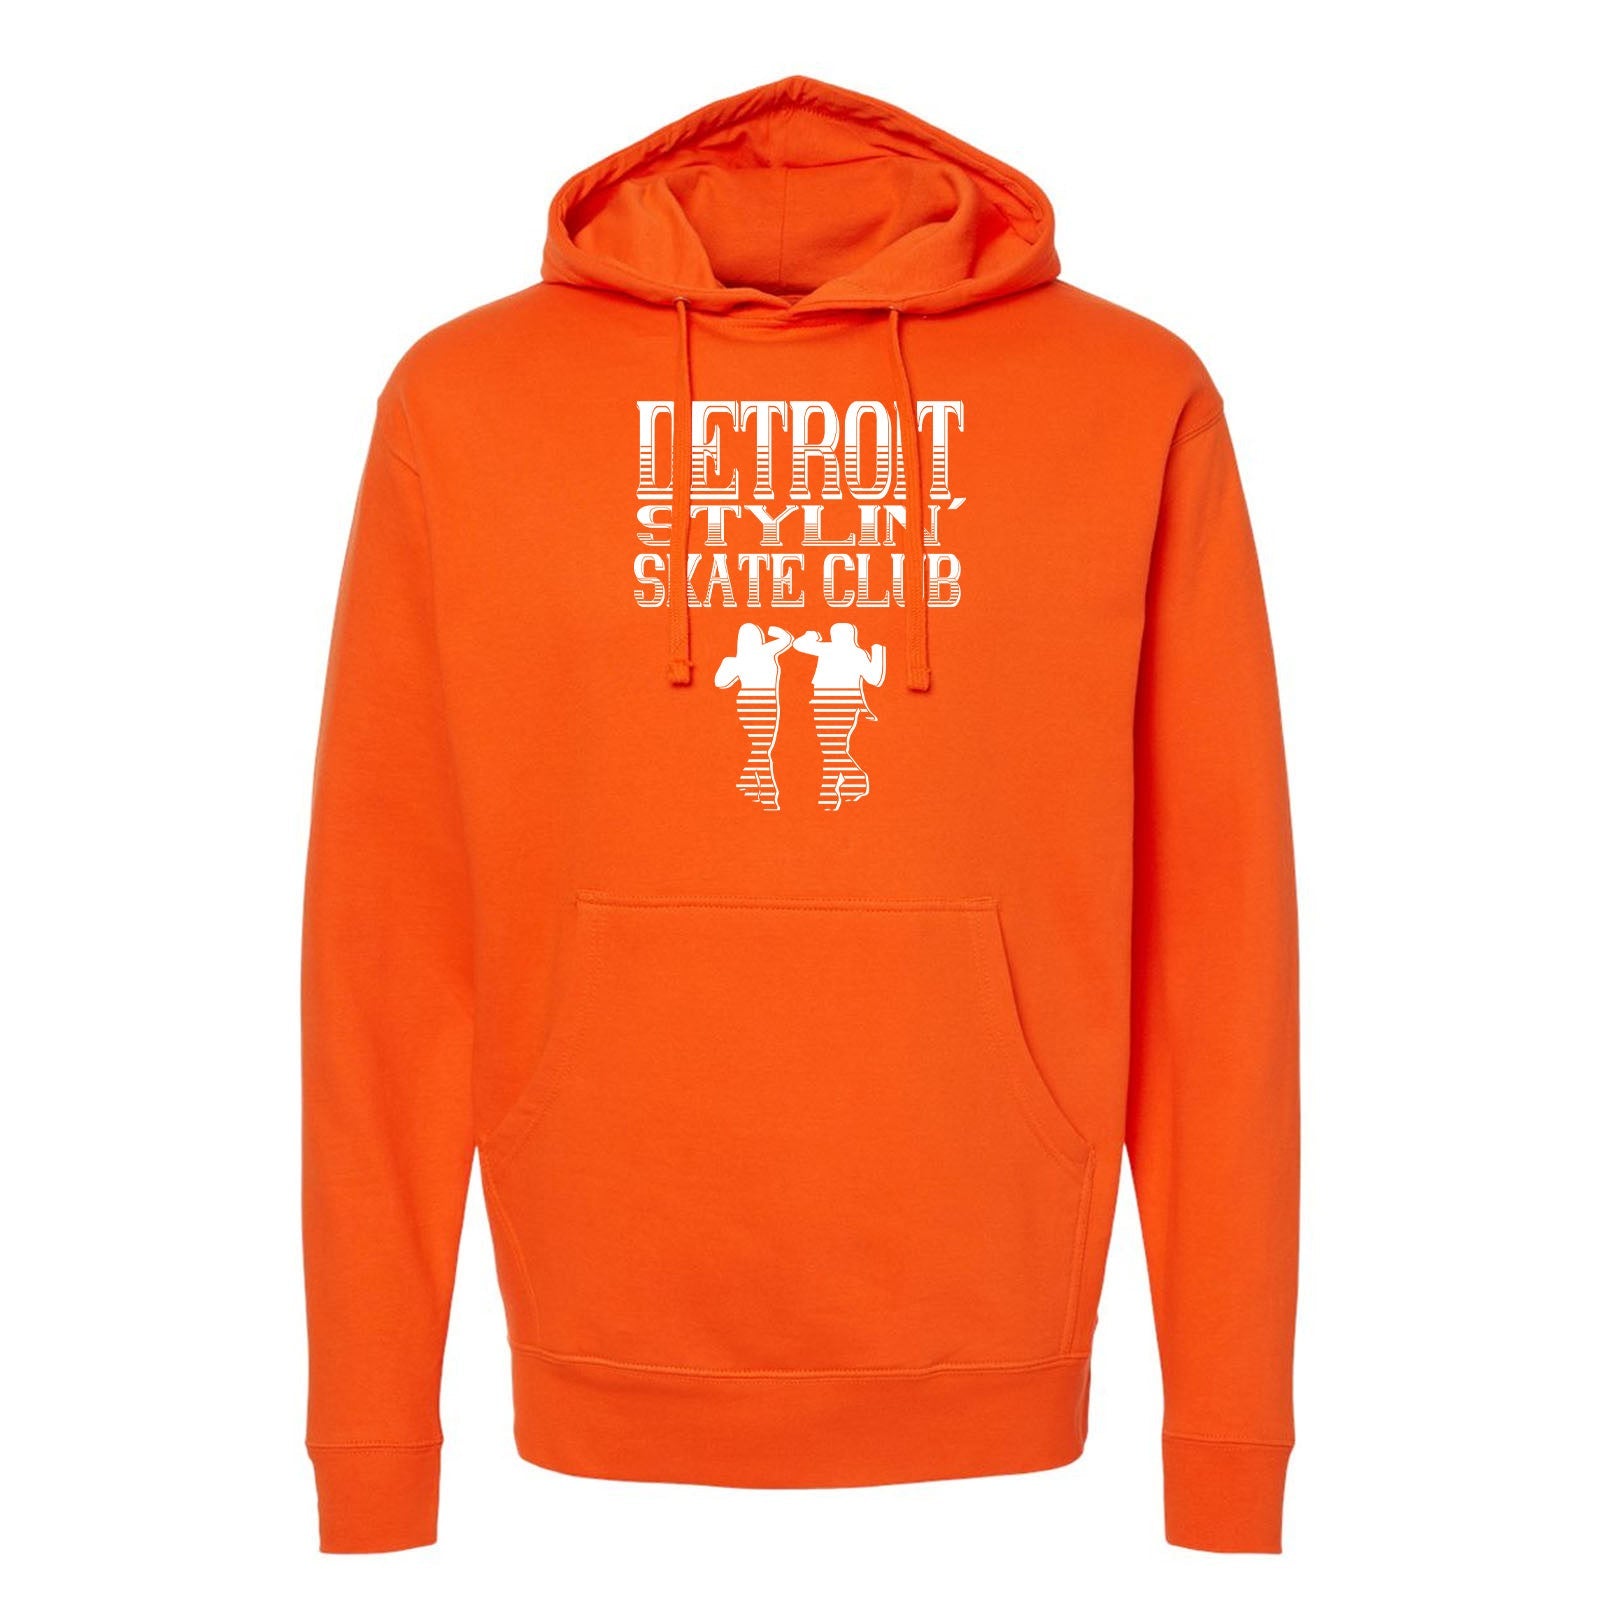 Detroit Stylin' Skate Club Independent Trading Co. Midweight Hooded Sweatshirt Printed - Mato & Hash